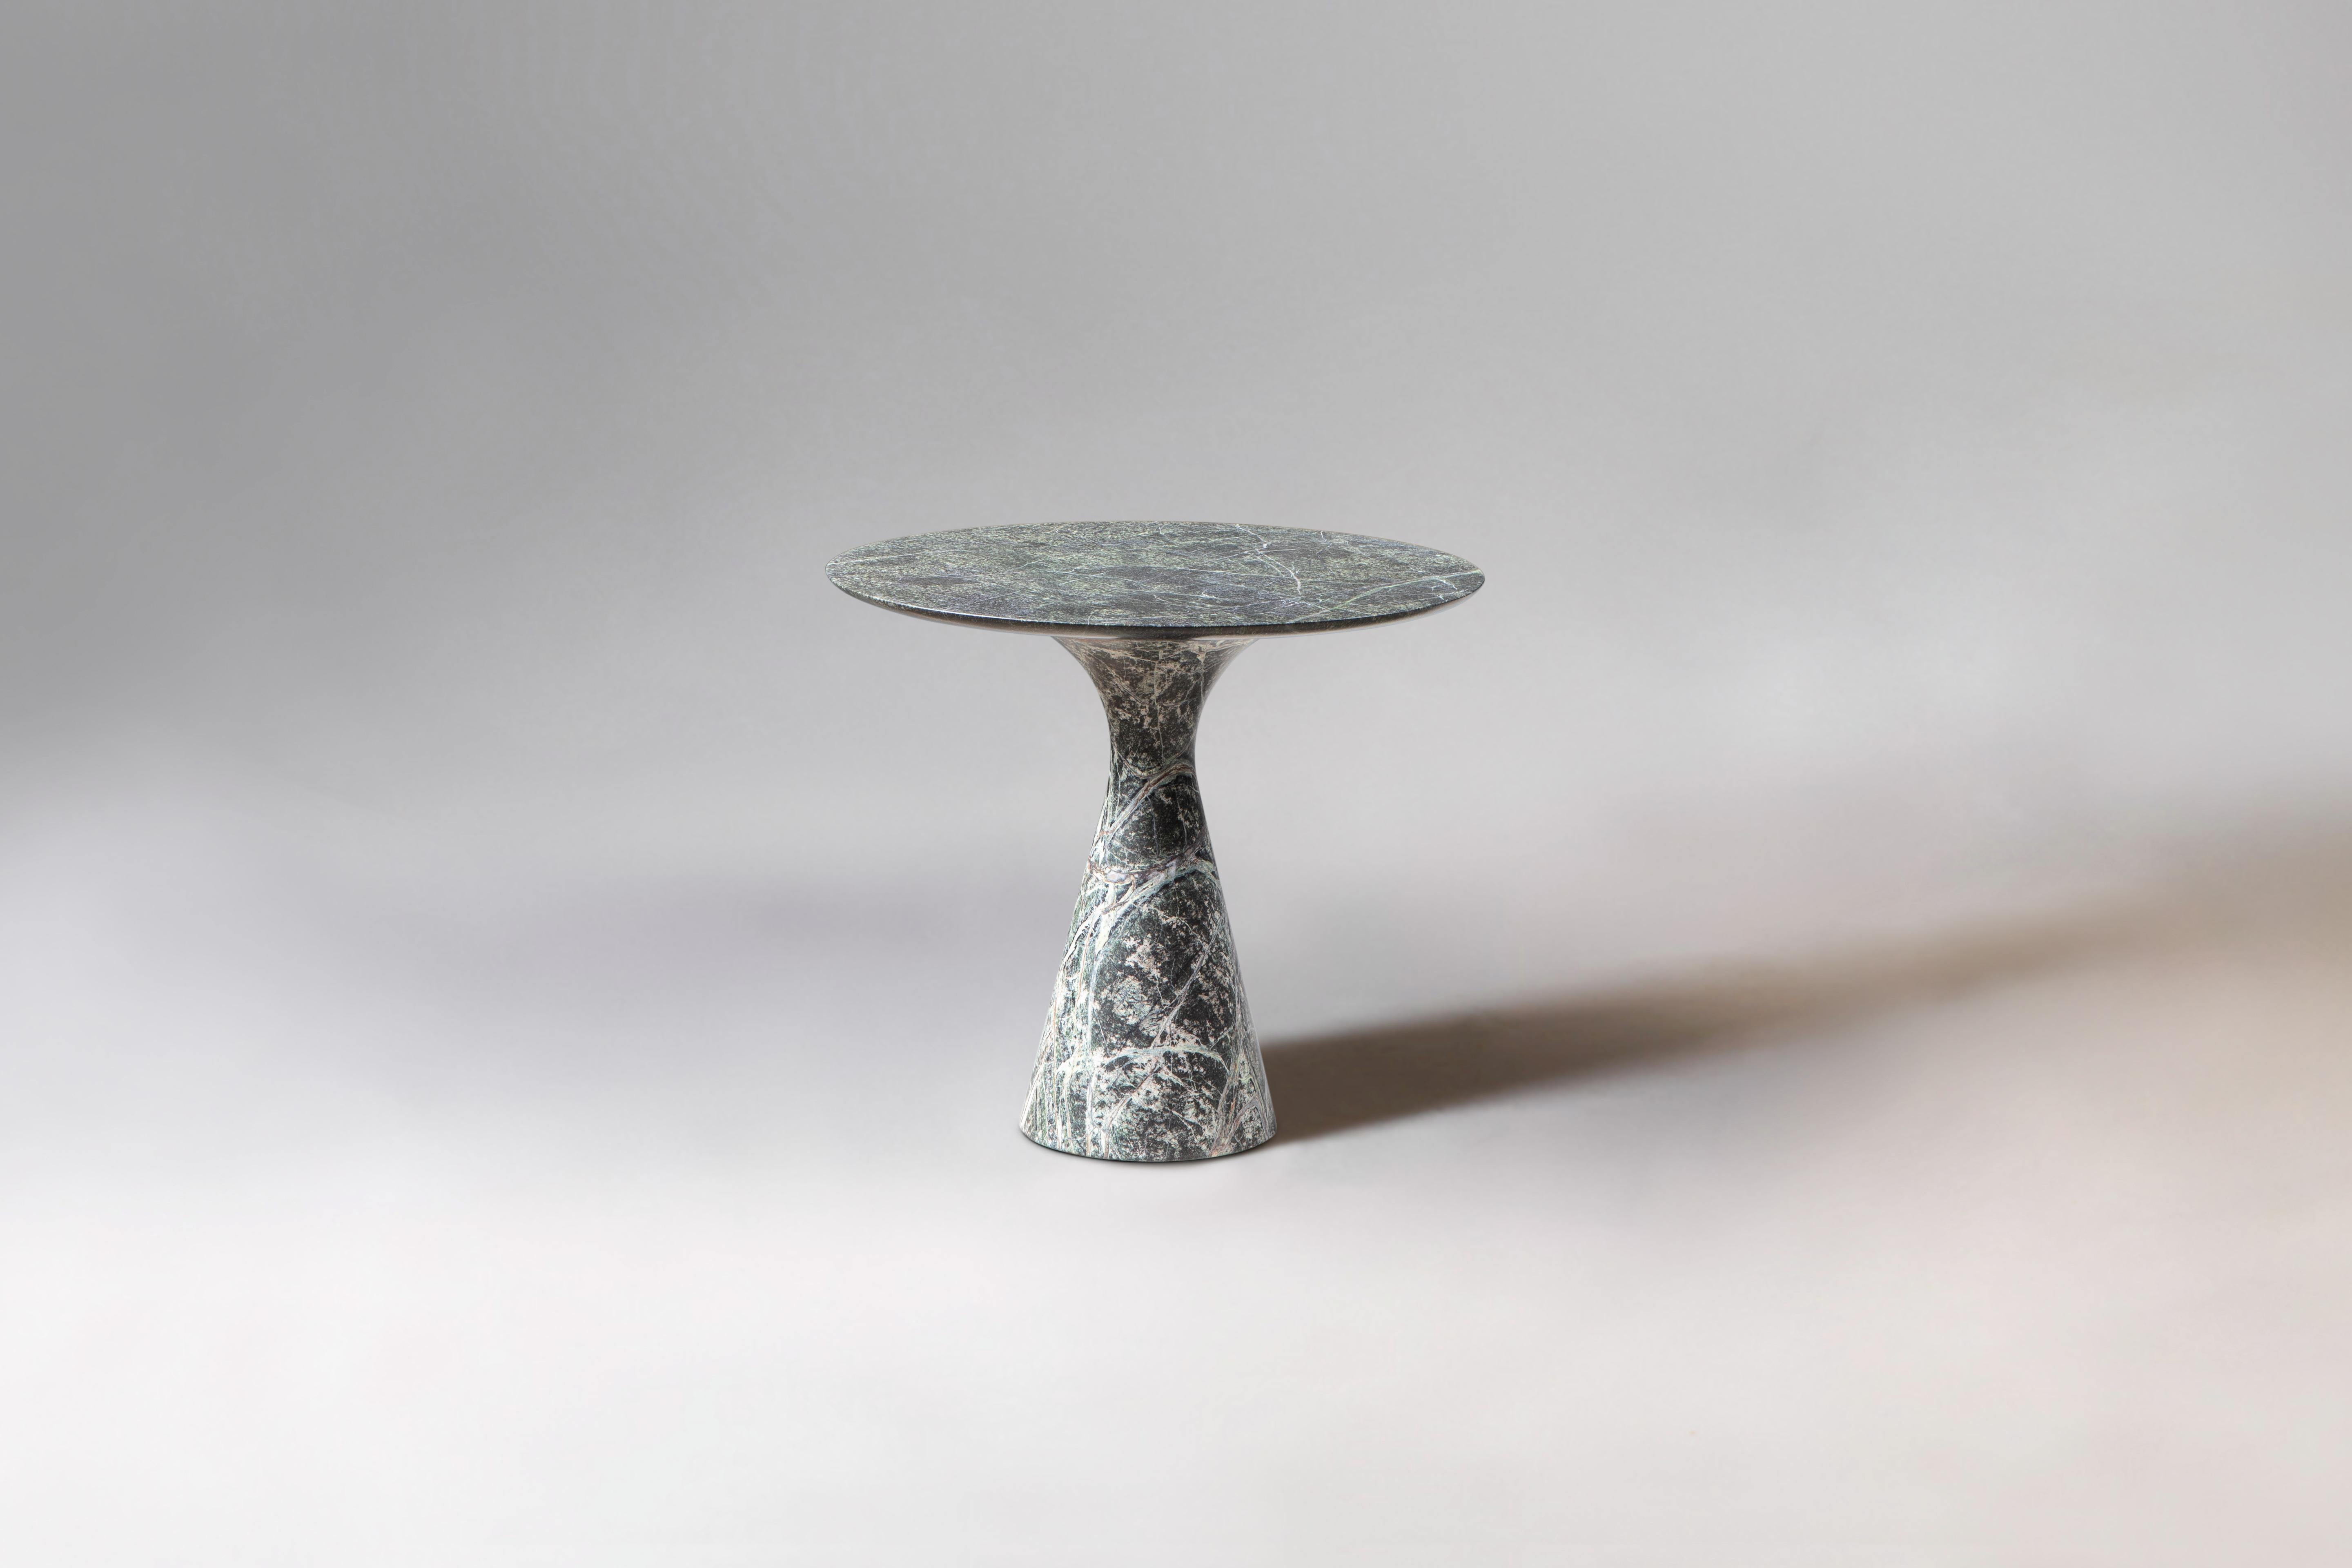 Picasso Green Refined Contemporary Marble Side Table 62/45
Dimensions: Diameter 62 x height 45 cm
Materials: Picasso Green

Angelo is the essence of a round table in natural stone, a sculptural shape in robust material with elegant lines and refined